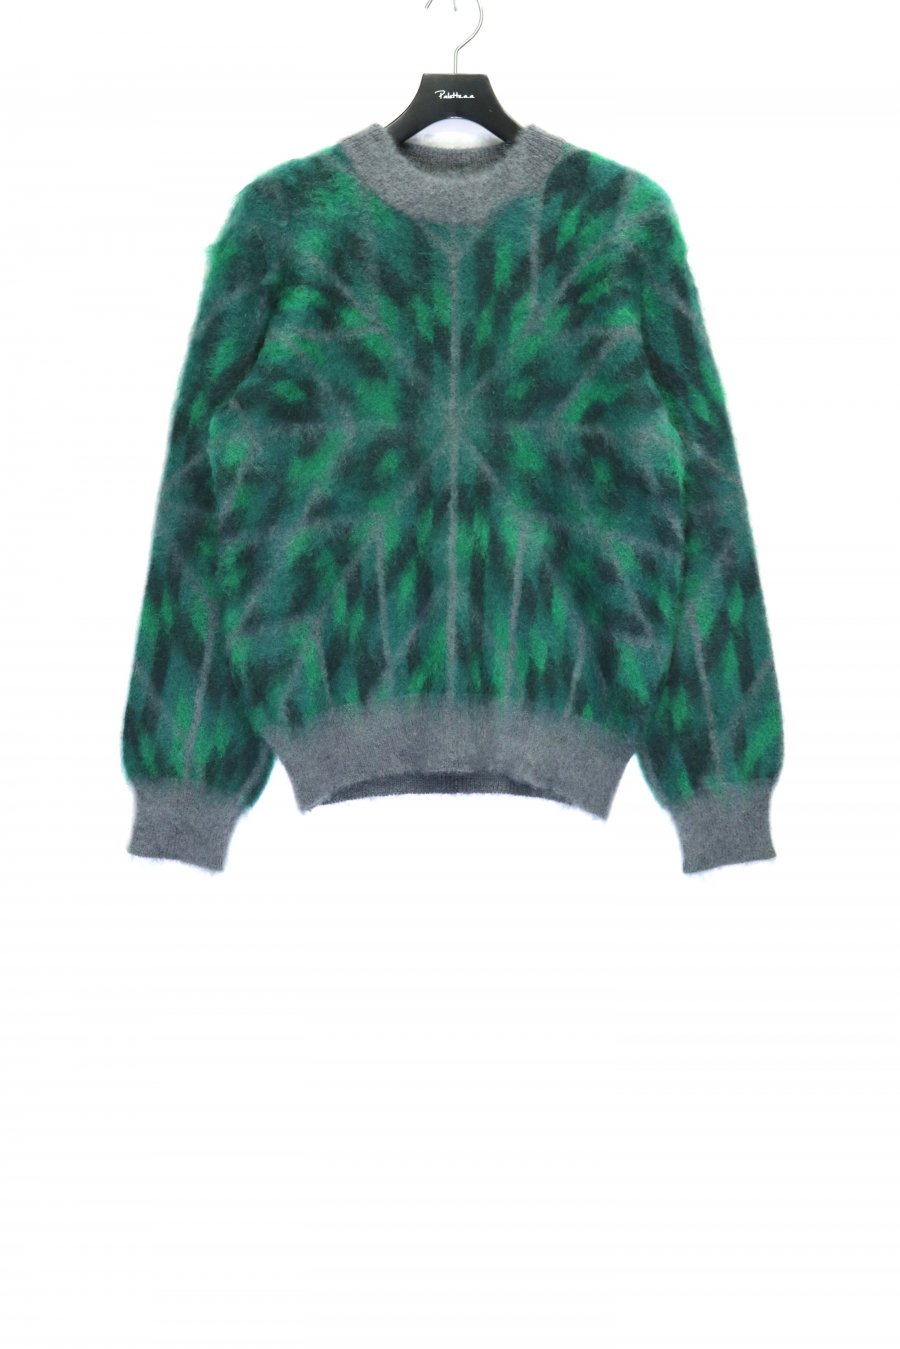 【30%OFF】JIGNOTE  21aw Mohair Knit（GREEN）<img class='new_mark_img2' src='https://img.shop-pro.jp/img/new/icons20.gif' style='border:none;display:inline;margin:0px;padding:0px;width:auto;' />